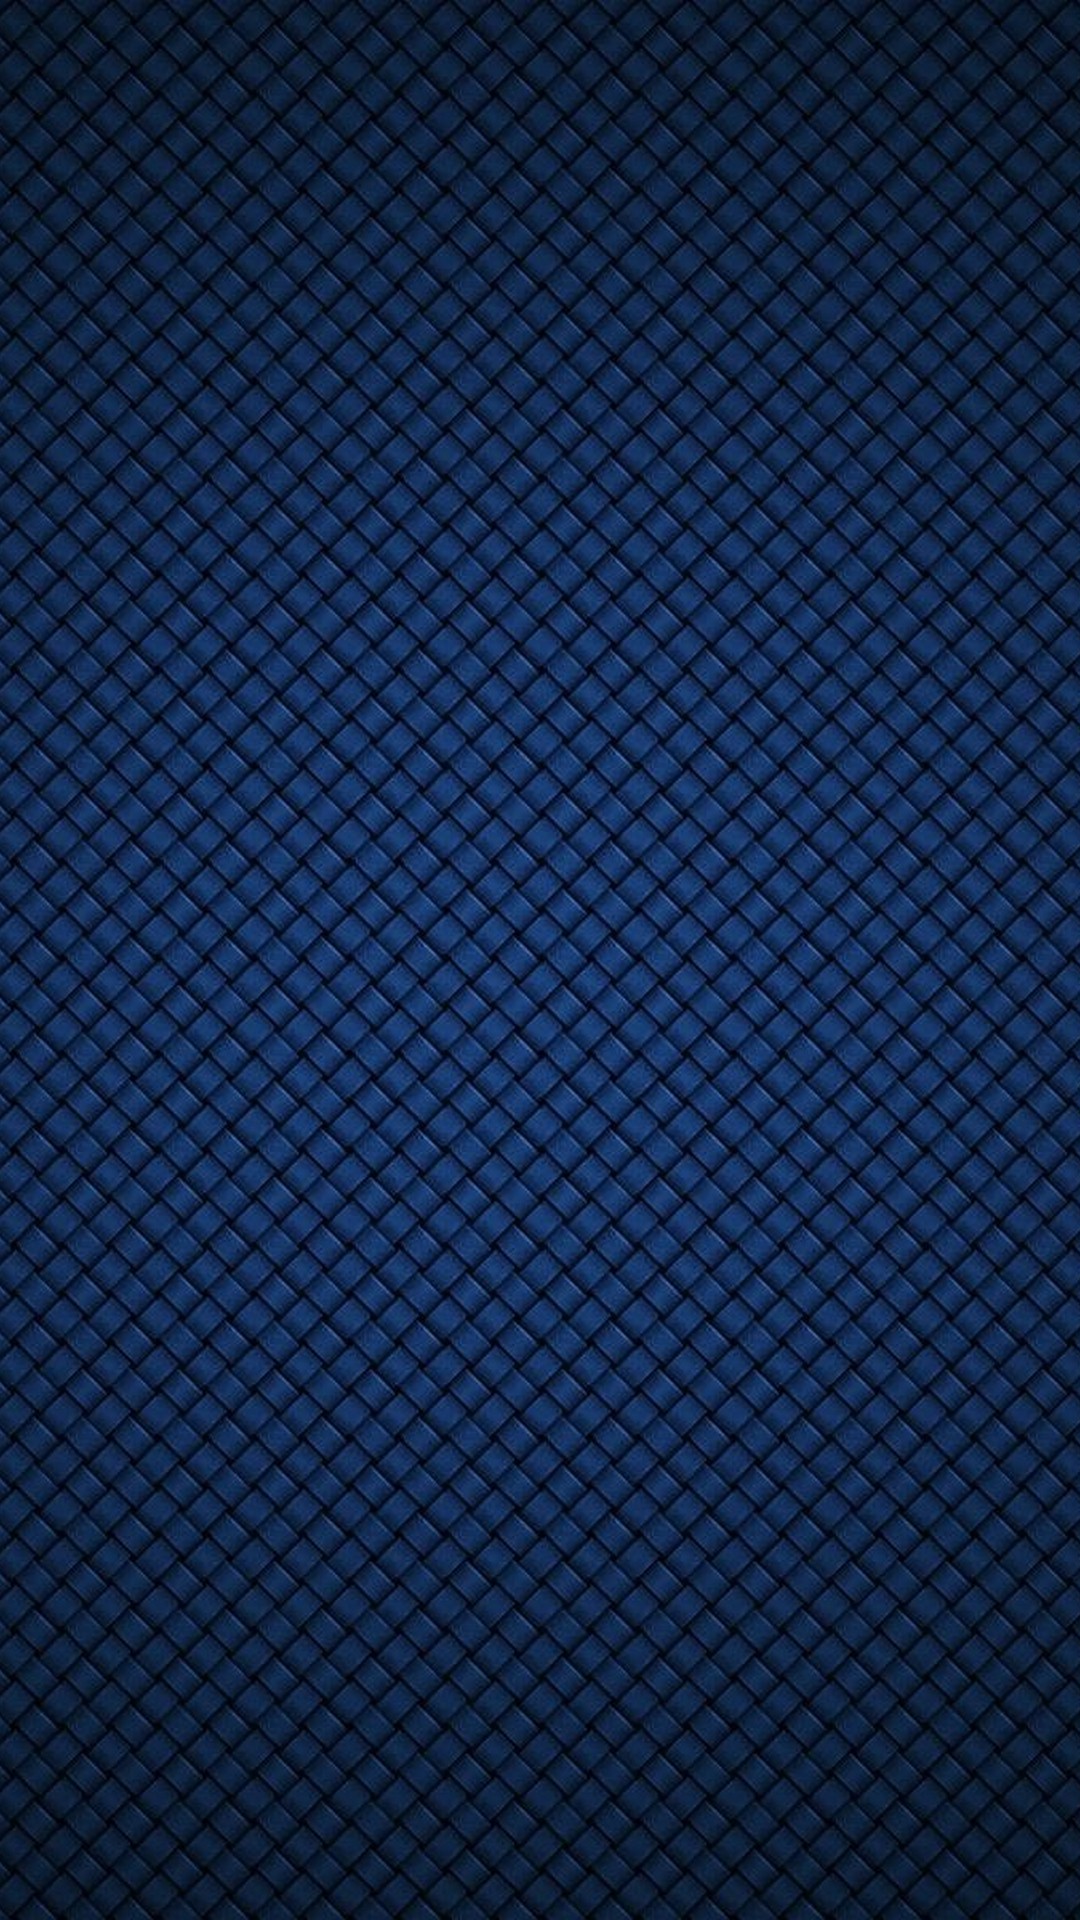 Blue iPhone X Wallpaper with high-resolution 1080x1920 pixel. You can use and set as wallpaper for Notebook Screensavers, Mac Wallpapers, Mobile Home Screen, iPhone or Android Phones Lock Screen